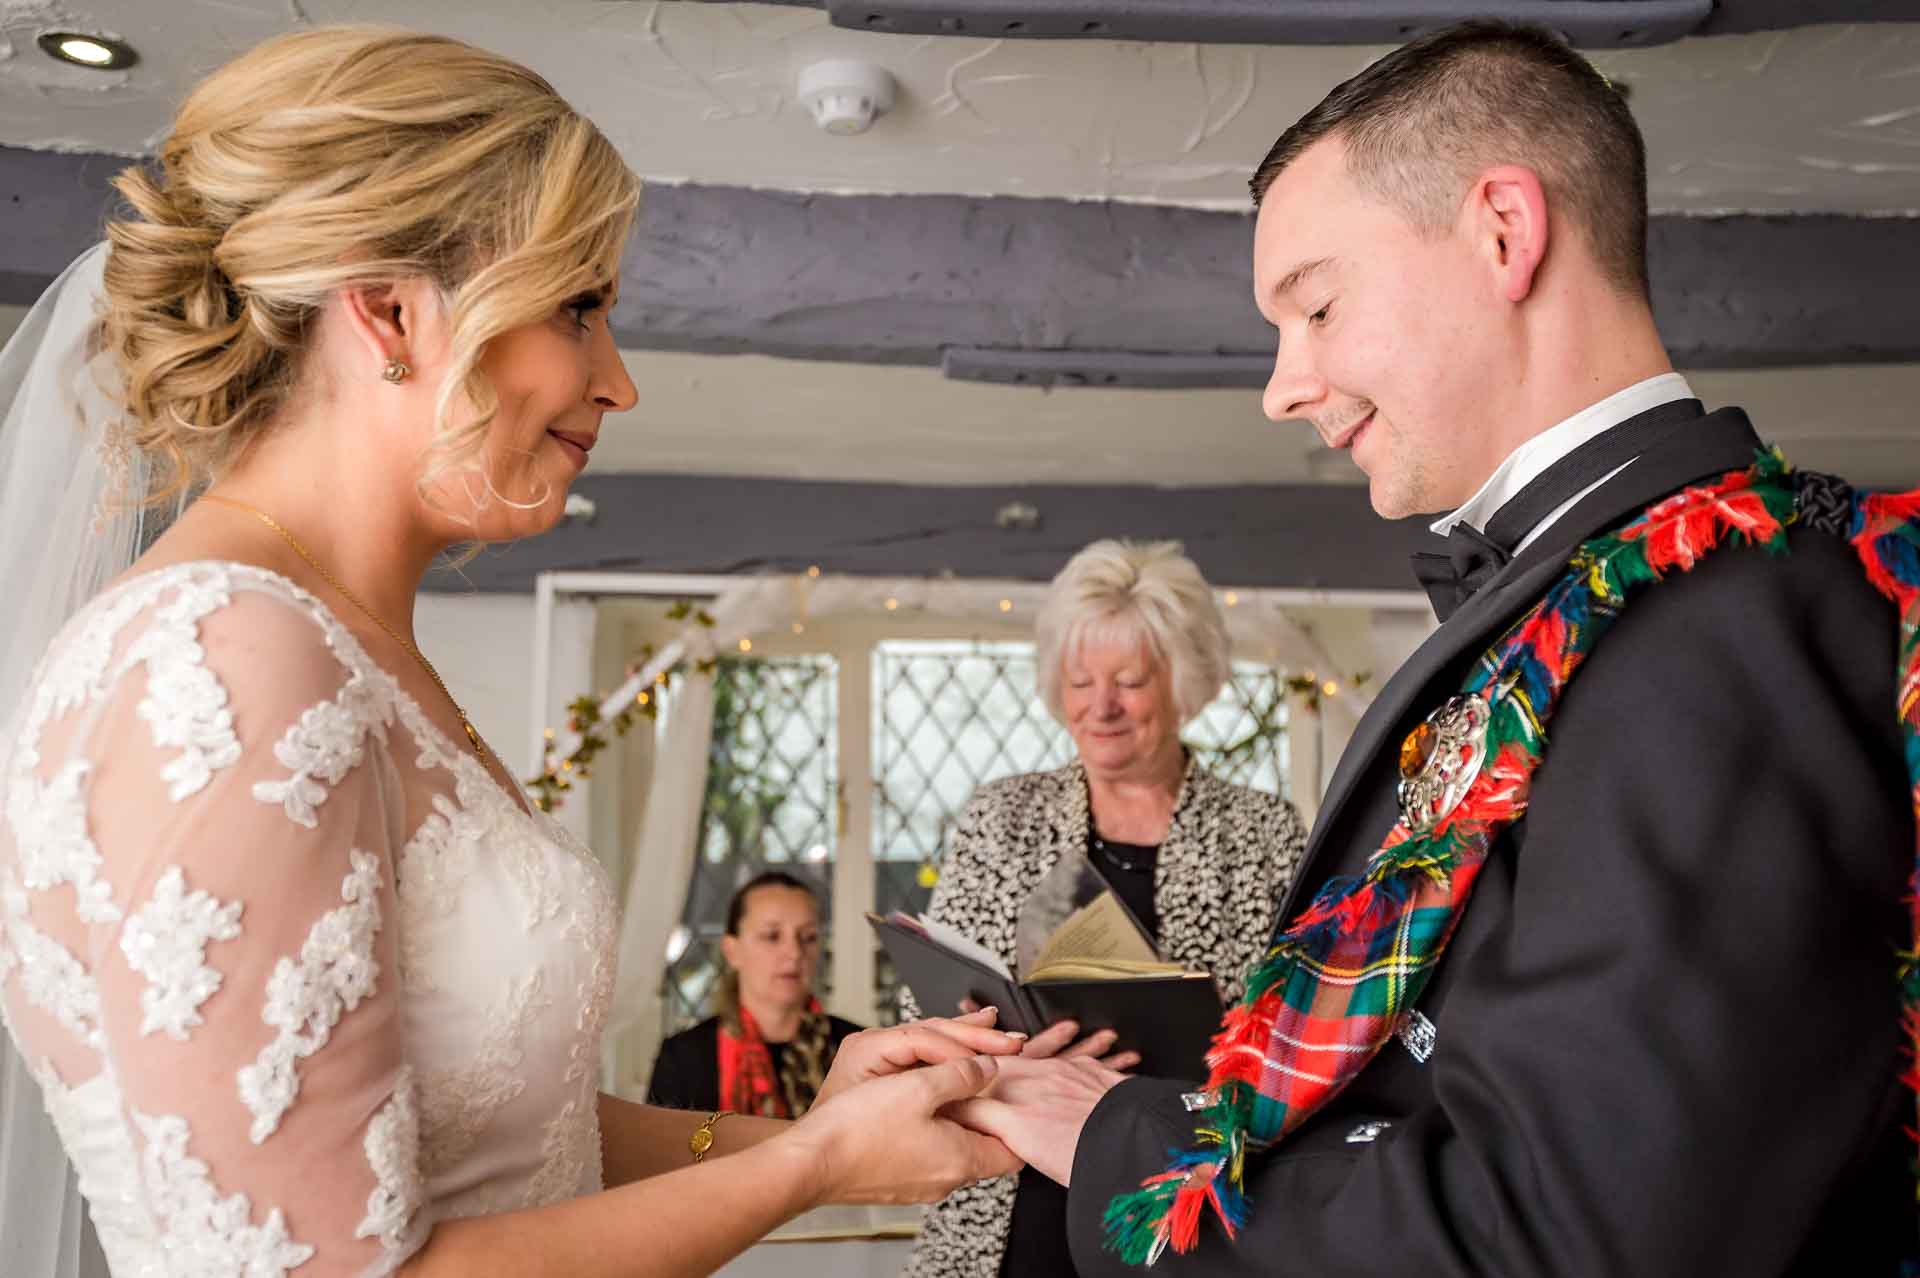 The bride places the ring on the groom's finger at Llechwen Hall Hotel wedding